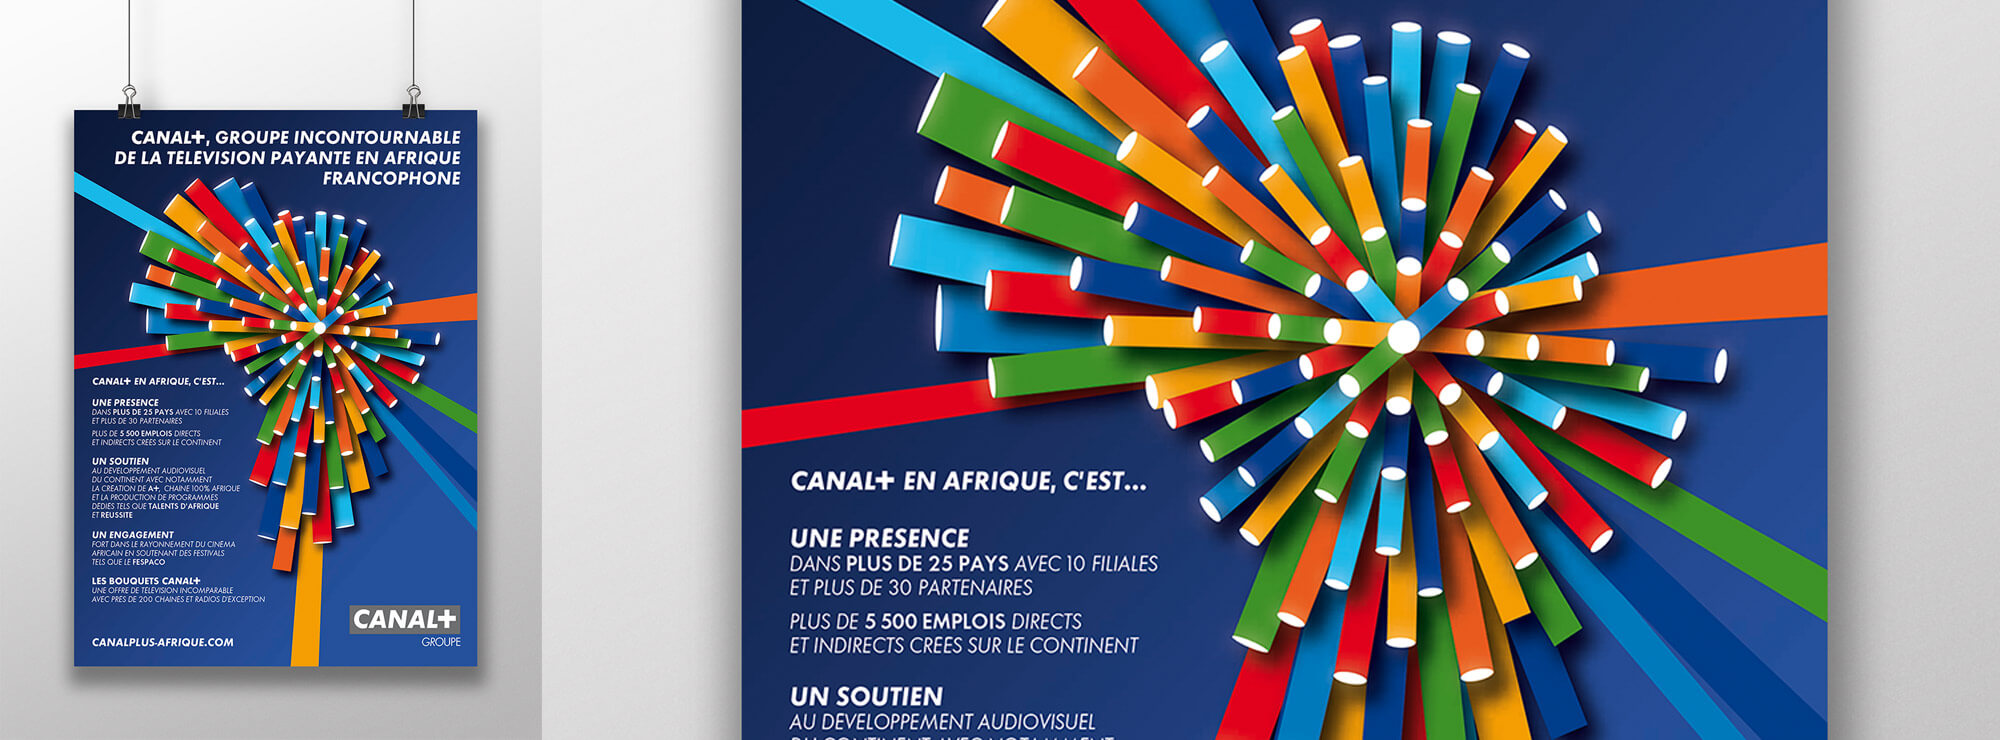 Canal+ - a colourful poster